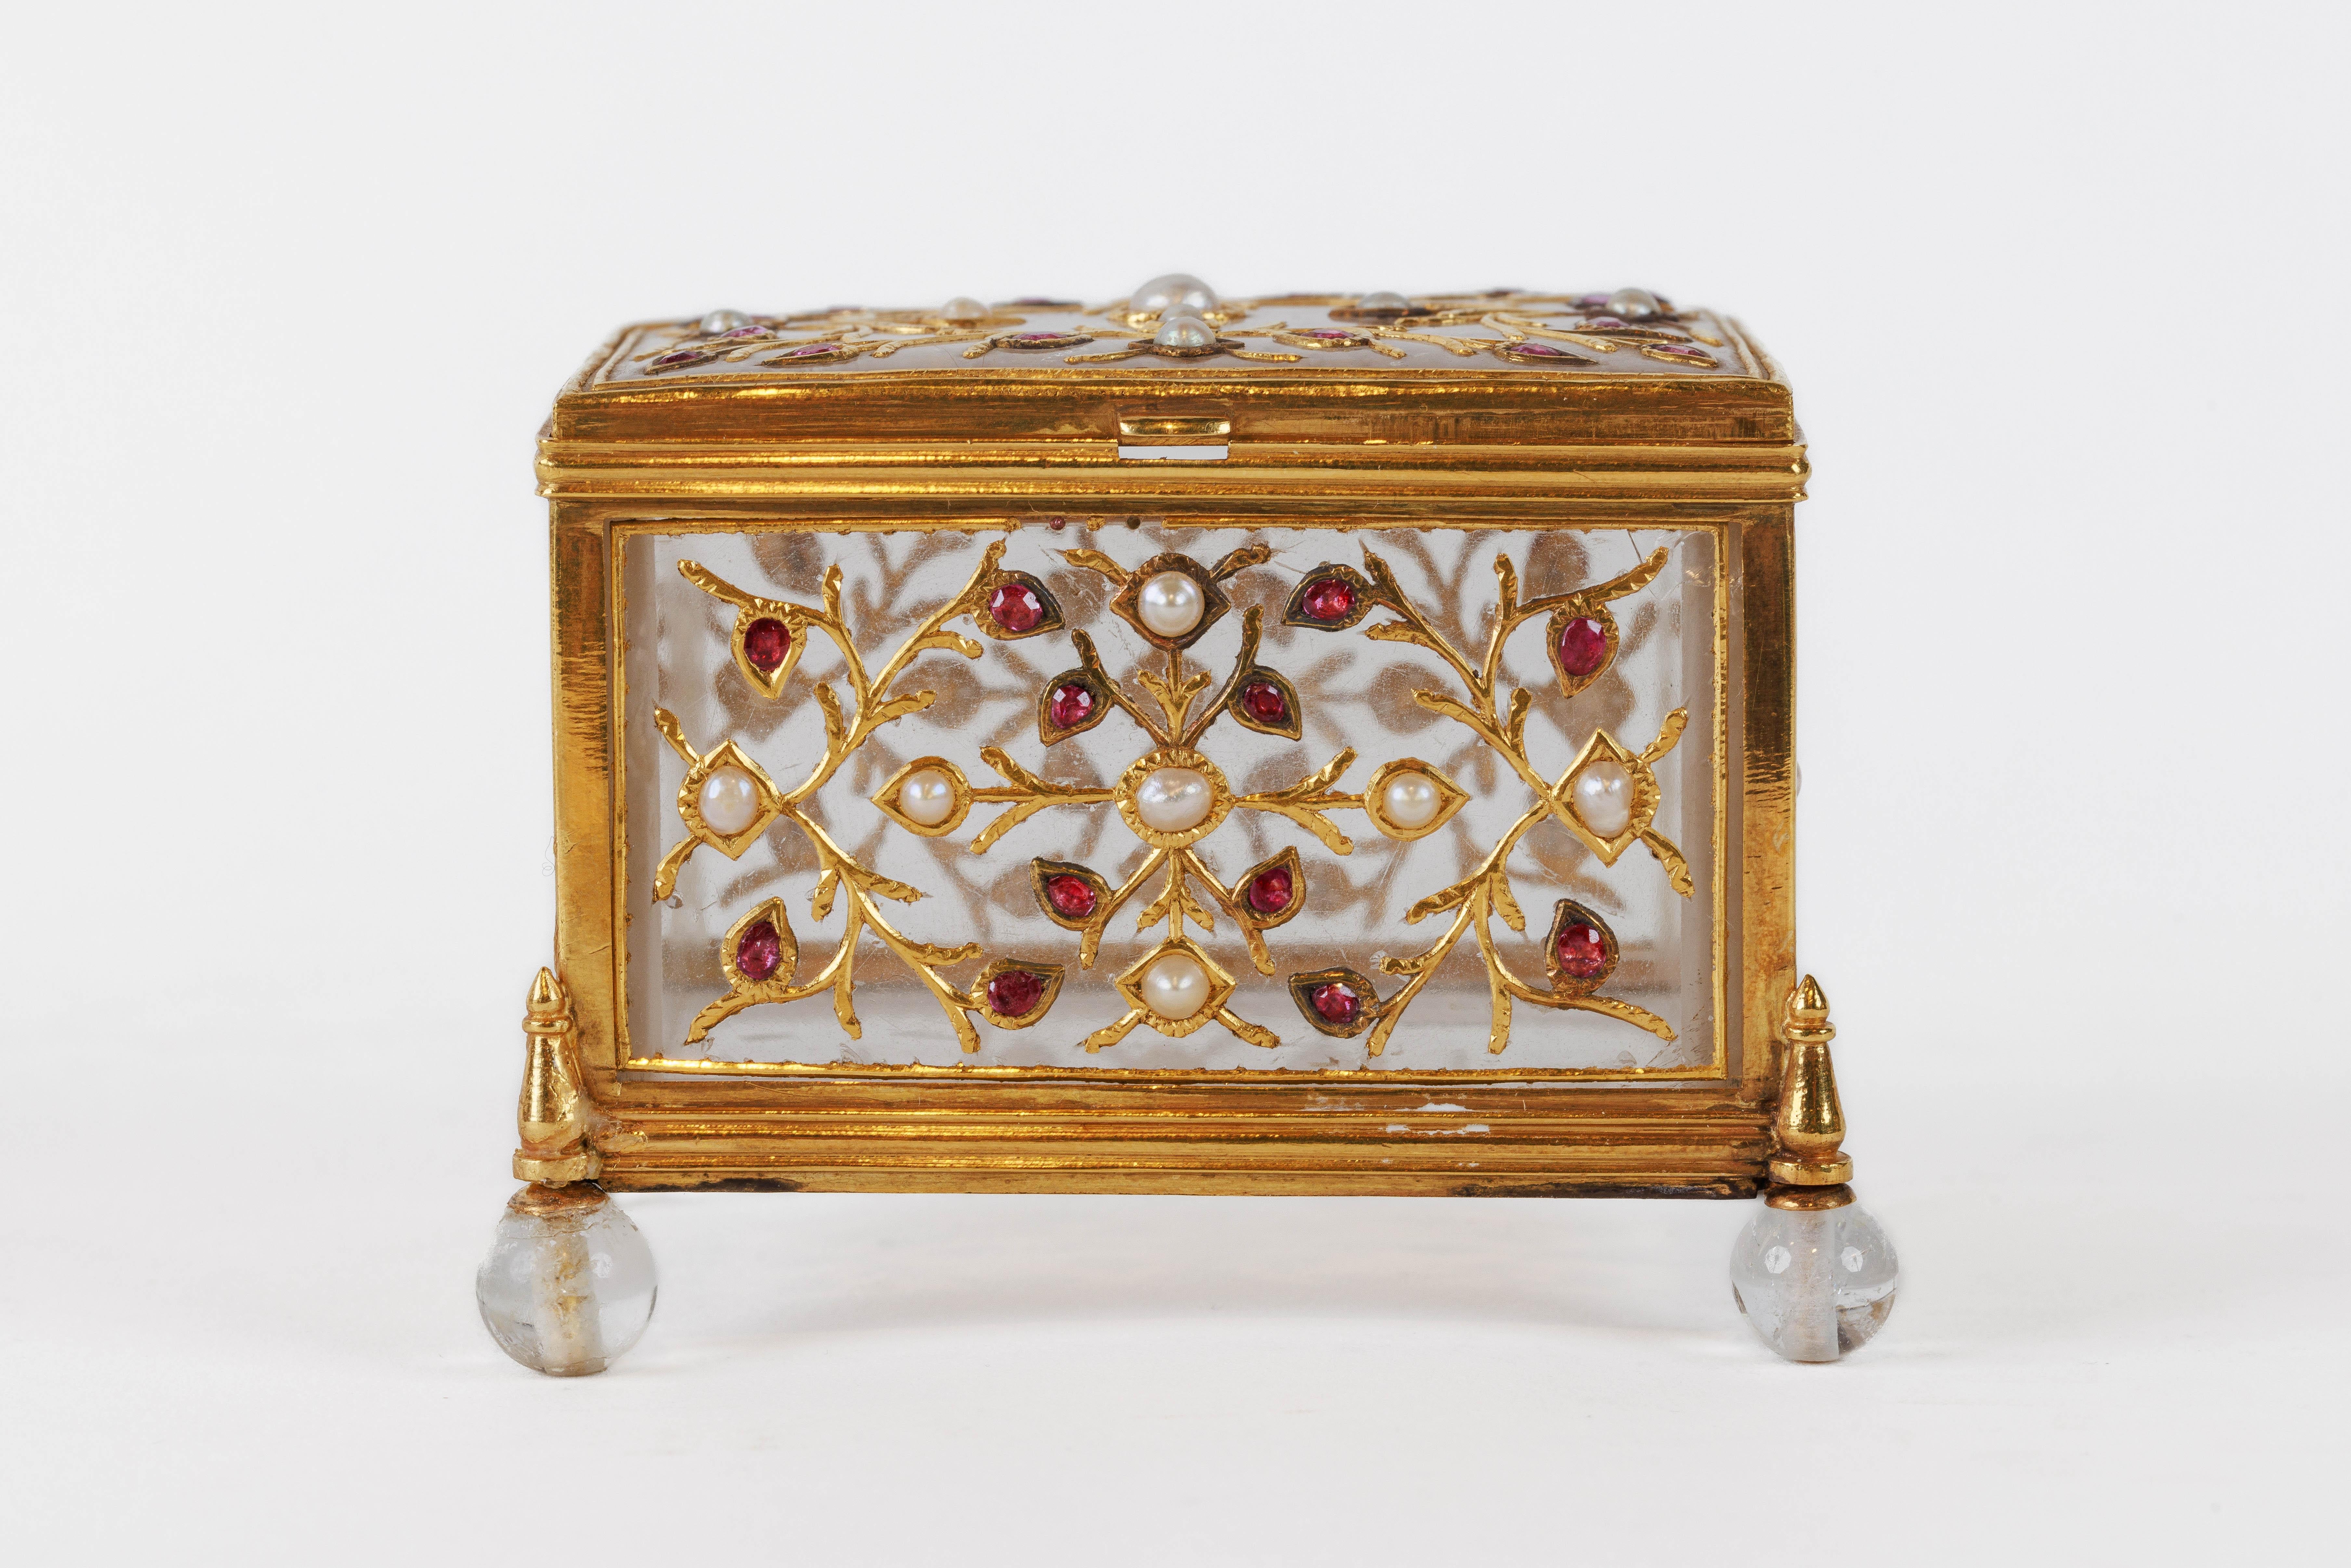 A Fine and Exquisite Mughal Gem Set Rock Crystal and Gold Box, India, 18th Century.

Finley set in 22k gold, mounted with rubies and pearls. The body carved from one piece of rock crystal, set with rubies and pearls in finely crafted gold mounts,